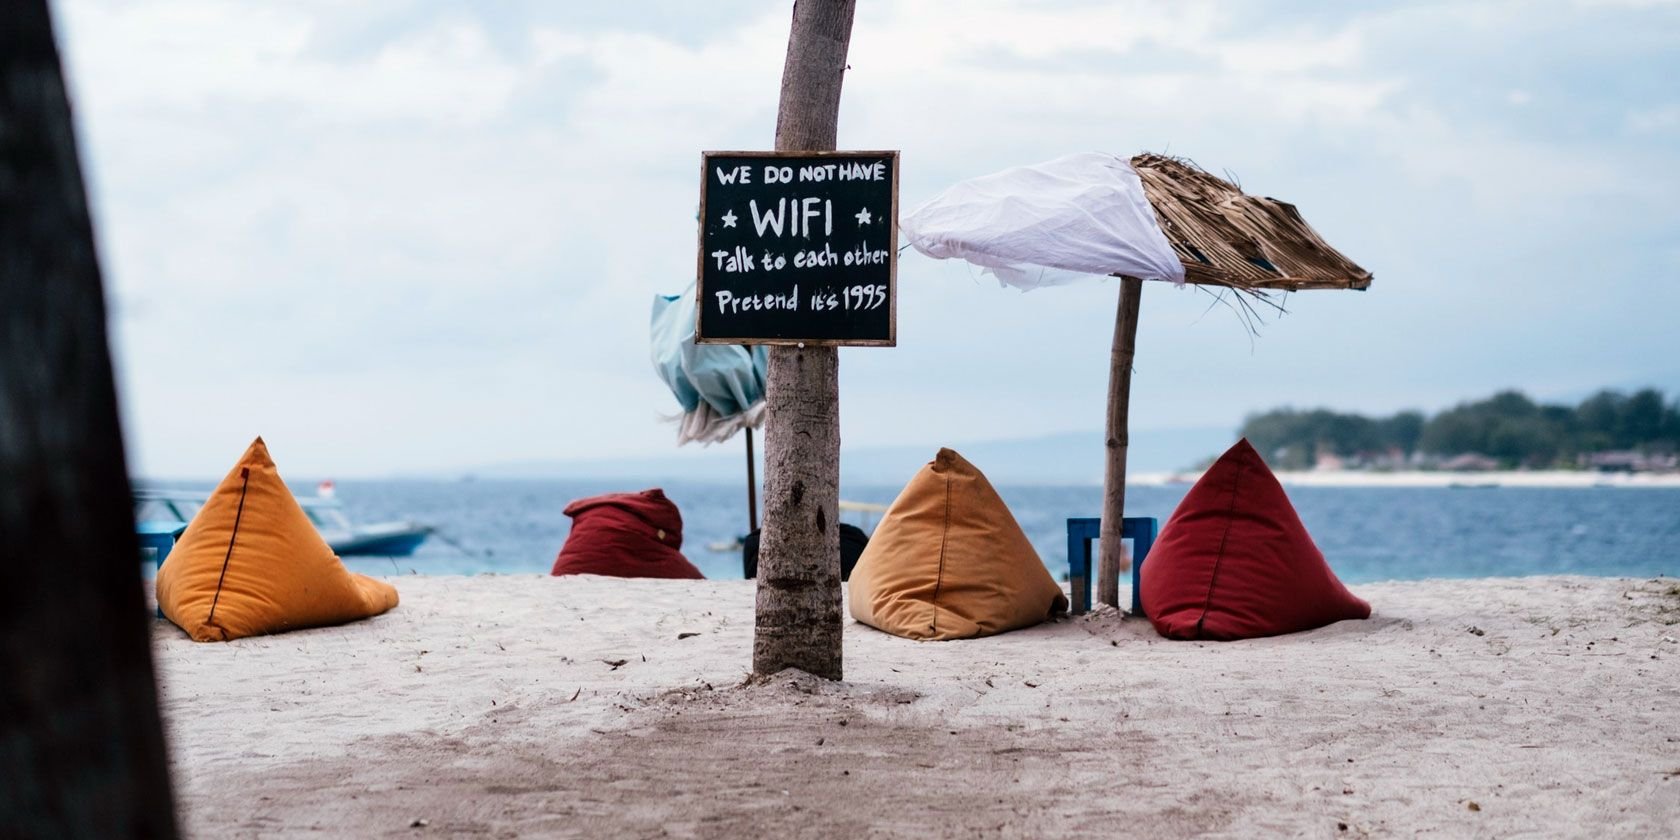 How to Get Wi-Fi Without an Internet Service Provider: 5 Ways